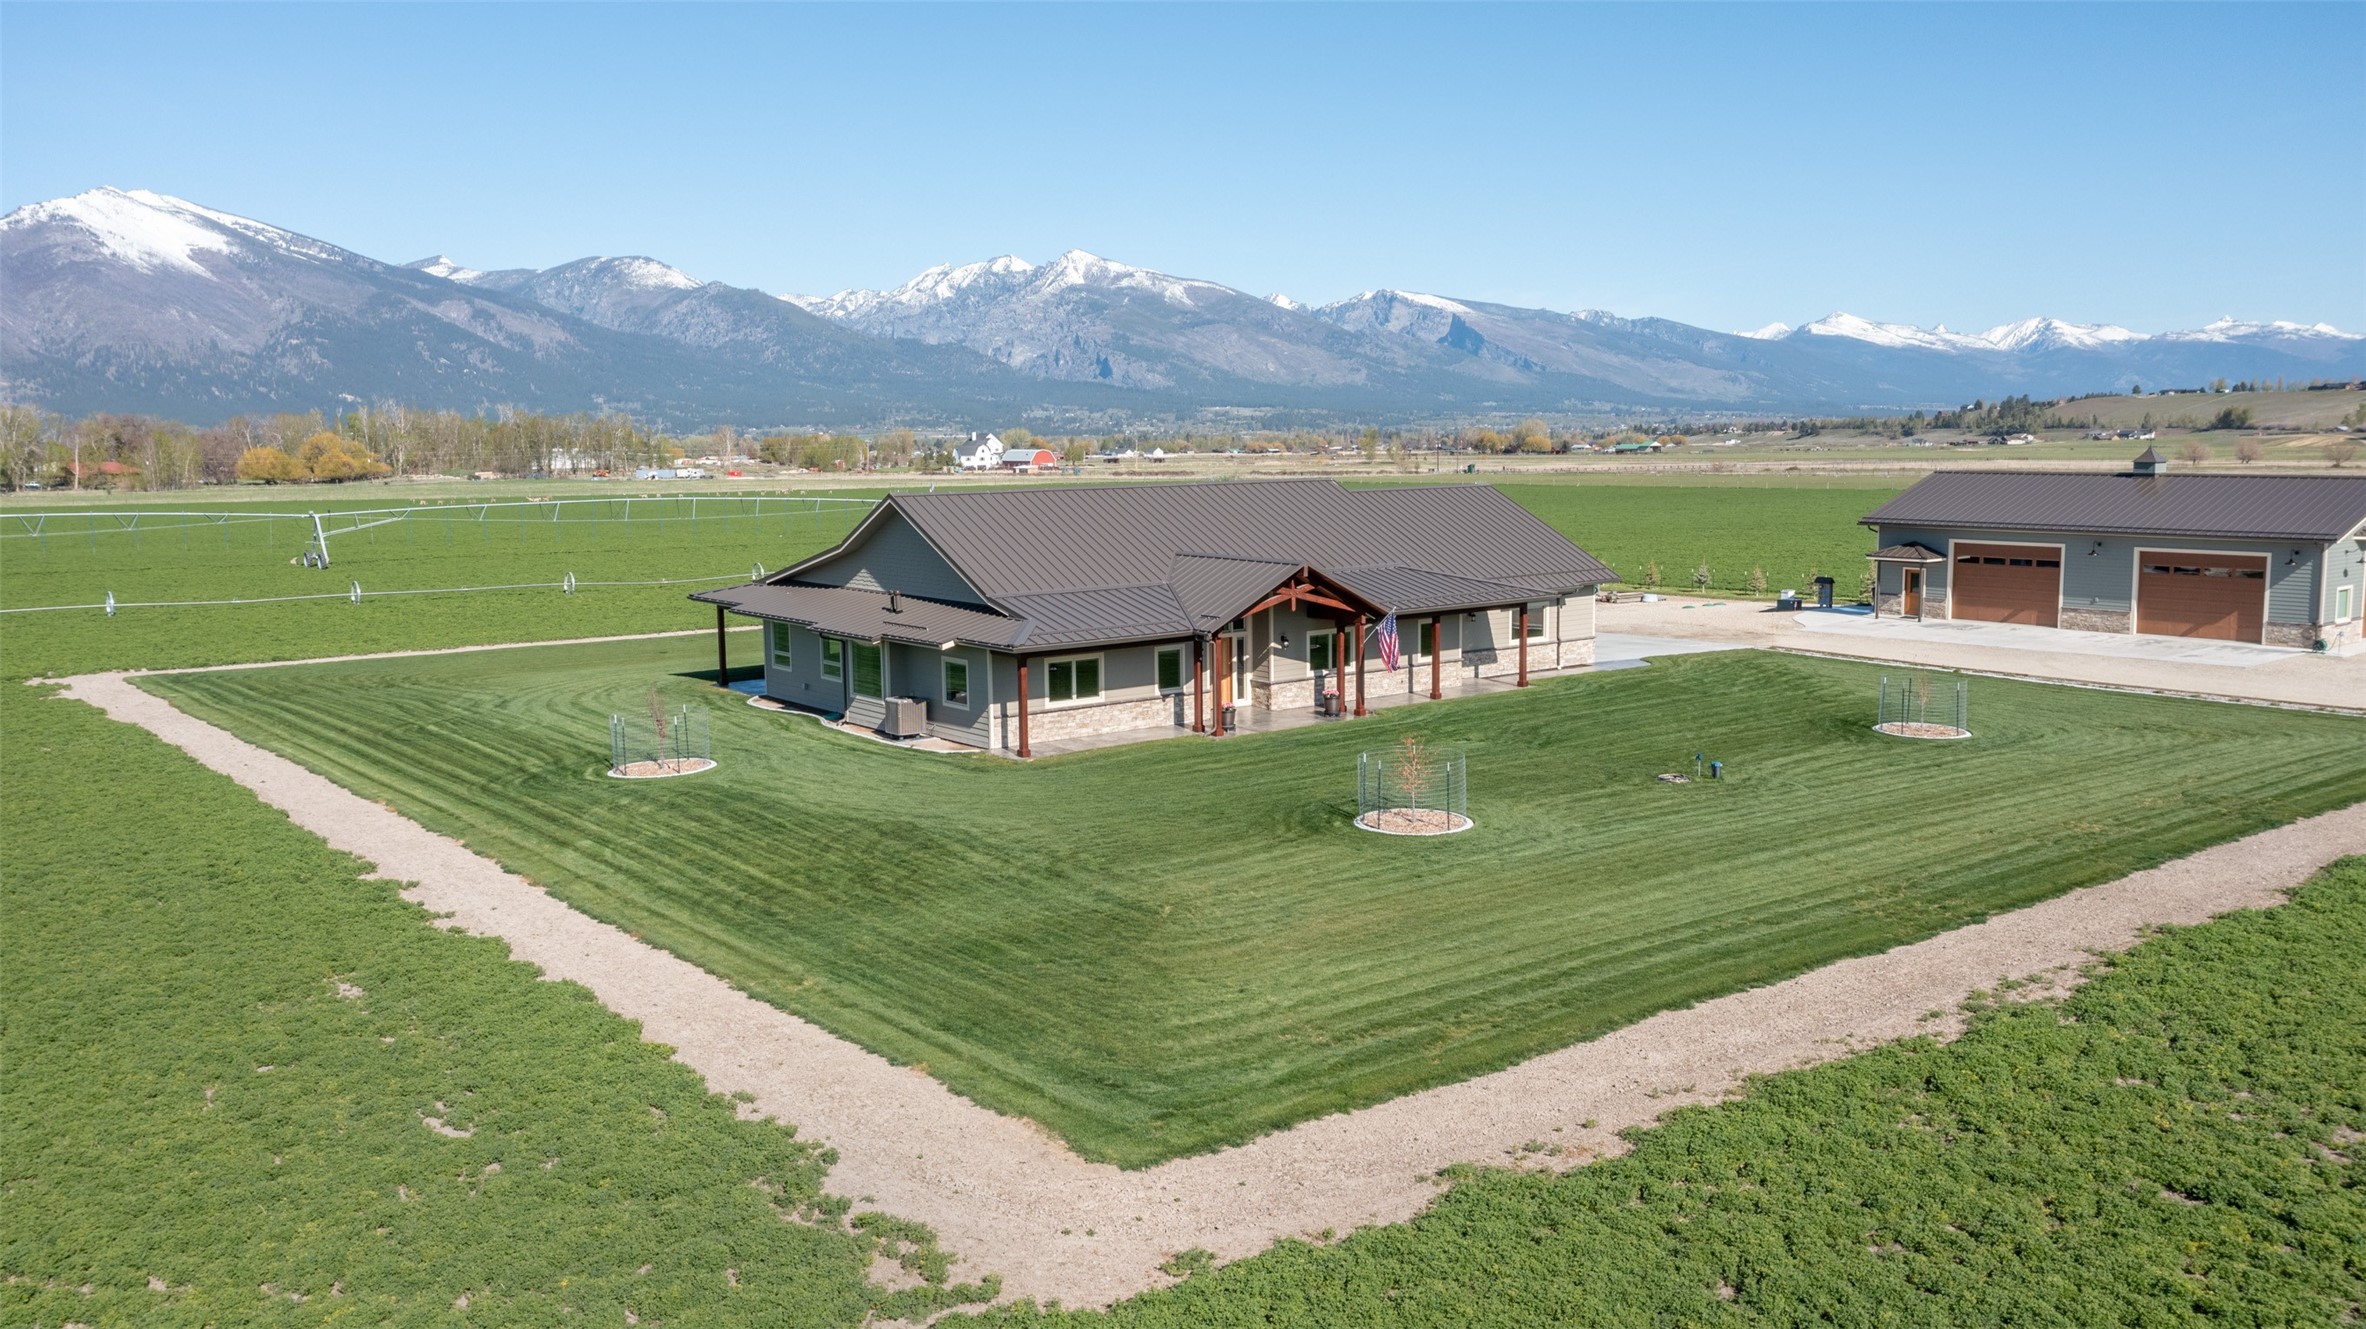 Nestled on 39.11 acres on the east side of the picturesque Bitterroot Valley, 535 Fish Hatchery in Hamilton, MT, offers an unparalleled living experience with breathtaking views of the Bitterroot Mountain Range spanning 40 miles from north to south. Just 3.5 miles from Hamilton's Main Street, this property boasts a prime location, ensuring a perfect blend of serenity and convenience, while also offering versatility with the ability for it to be subdivided. As you approach, a custom 2¼" Ribbon Sapele Mahogany front door welcomes you to a residence completed in September 2019, featuring 3 bedrooms and 2.5 bathrooms across 2,425 Sq. Ft. of meticulously designed living space. The attention to detail is evident throughout, from the reclaimed hardwood floors throughout the living area to the luxurious amenities in every corner. The kitchen is a chef's dream with granite countertops, Dacor appliances, a Kohler Whitehaven apron sink, and a Dacor wine refrigerator. The dining area is adorned with a custom 24" Tuscany alabaster pendant light, creating an elegant atmosphere for gatherings. The bedrooms offer comfort with Villanova Berber carpet, designer closets, and Casablanca Panama 54” ceiling fans. Bathrooms feature tile floors, granite countertops, and high-end fixtures, including a Kohler Stargaze 6’ freestanding tub in the owner’s suite. Energy efficiency is the key to this home. Designated by Bonneville Power Authority (BPA) and Ravalli Electrical Cooperative (REC) as an energy efficient “Montana House II”. The Sierra Pacific H3 windows and doors throughout the home provide stunning v360-degree views and exceptional energy efficiency, complemented by custom window blinds, 6” wide interior walls, and R-15 Roxul rock-wool insulation for enhanced interior sound damping. The property extends its charm to the exterior, showcasing Diamond Kote siding, stamped concrete patios, and a covered front porch to enjoy your morning coffee watching the sun rise or you can relax in the evenings under a covered back patio and watch the sun set over the Bitterroot Mountains.The 36x60 fully insulated shop, completed in November 2023, offers a versatile space with a full bathroom, Rinnai tankless water heater, Rinnai 35,000 BTU propane heater, 200-amp electrical capacity with 30 & 50-amp RV electrical outlet, in-floor drains, 26-gauge metal roof with 13’ ceiling. This structure includes three bays, making it a perfect complement to the main residence. For the agriculture enthusiast, the land is designated as "prime farmland" and "farmland of statewide importance" from the NRCS, supporting 74 AUMs. The land is classified as “grazing” and “Bonified Agriculture Land” with a tax rate of 2.16. An irrigation system, utilizing Reinke center pivot technology, ensures efficient water distribution to the 38 acres planted with Round-Up Ready Alfalfa offering 3 cuttings per year, equating to 4.5 tons per acre annually. Daily Ditches Irrigation District supplies the irrigation water that is fed to the Reinke center pivot, 638 feet long with 4 towers. The turbine pump is a Gould 25 HP - 410 GPM. 780 feet of wheel-line complements the center pivot. This irrigation system is stand alone and not shared with any other neighbors. With 93 Colorado Blue Spruce trees, a sprawling lawn, and a 2,400 Sq. Ft. enclosed garden, this property offers a harmonious blend of luxury living and agricultural potential. This stunning property will truly deliver the epitome of Montana living.